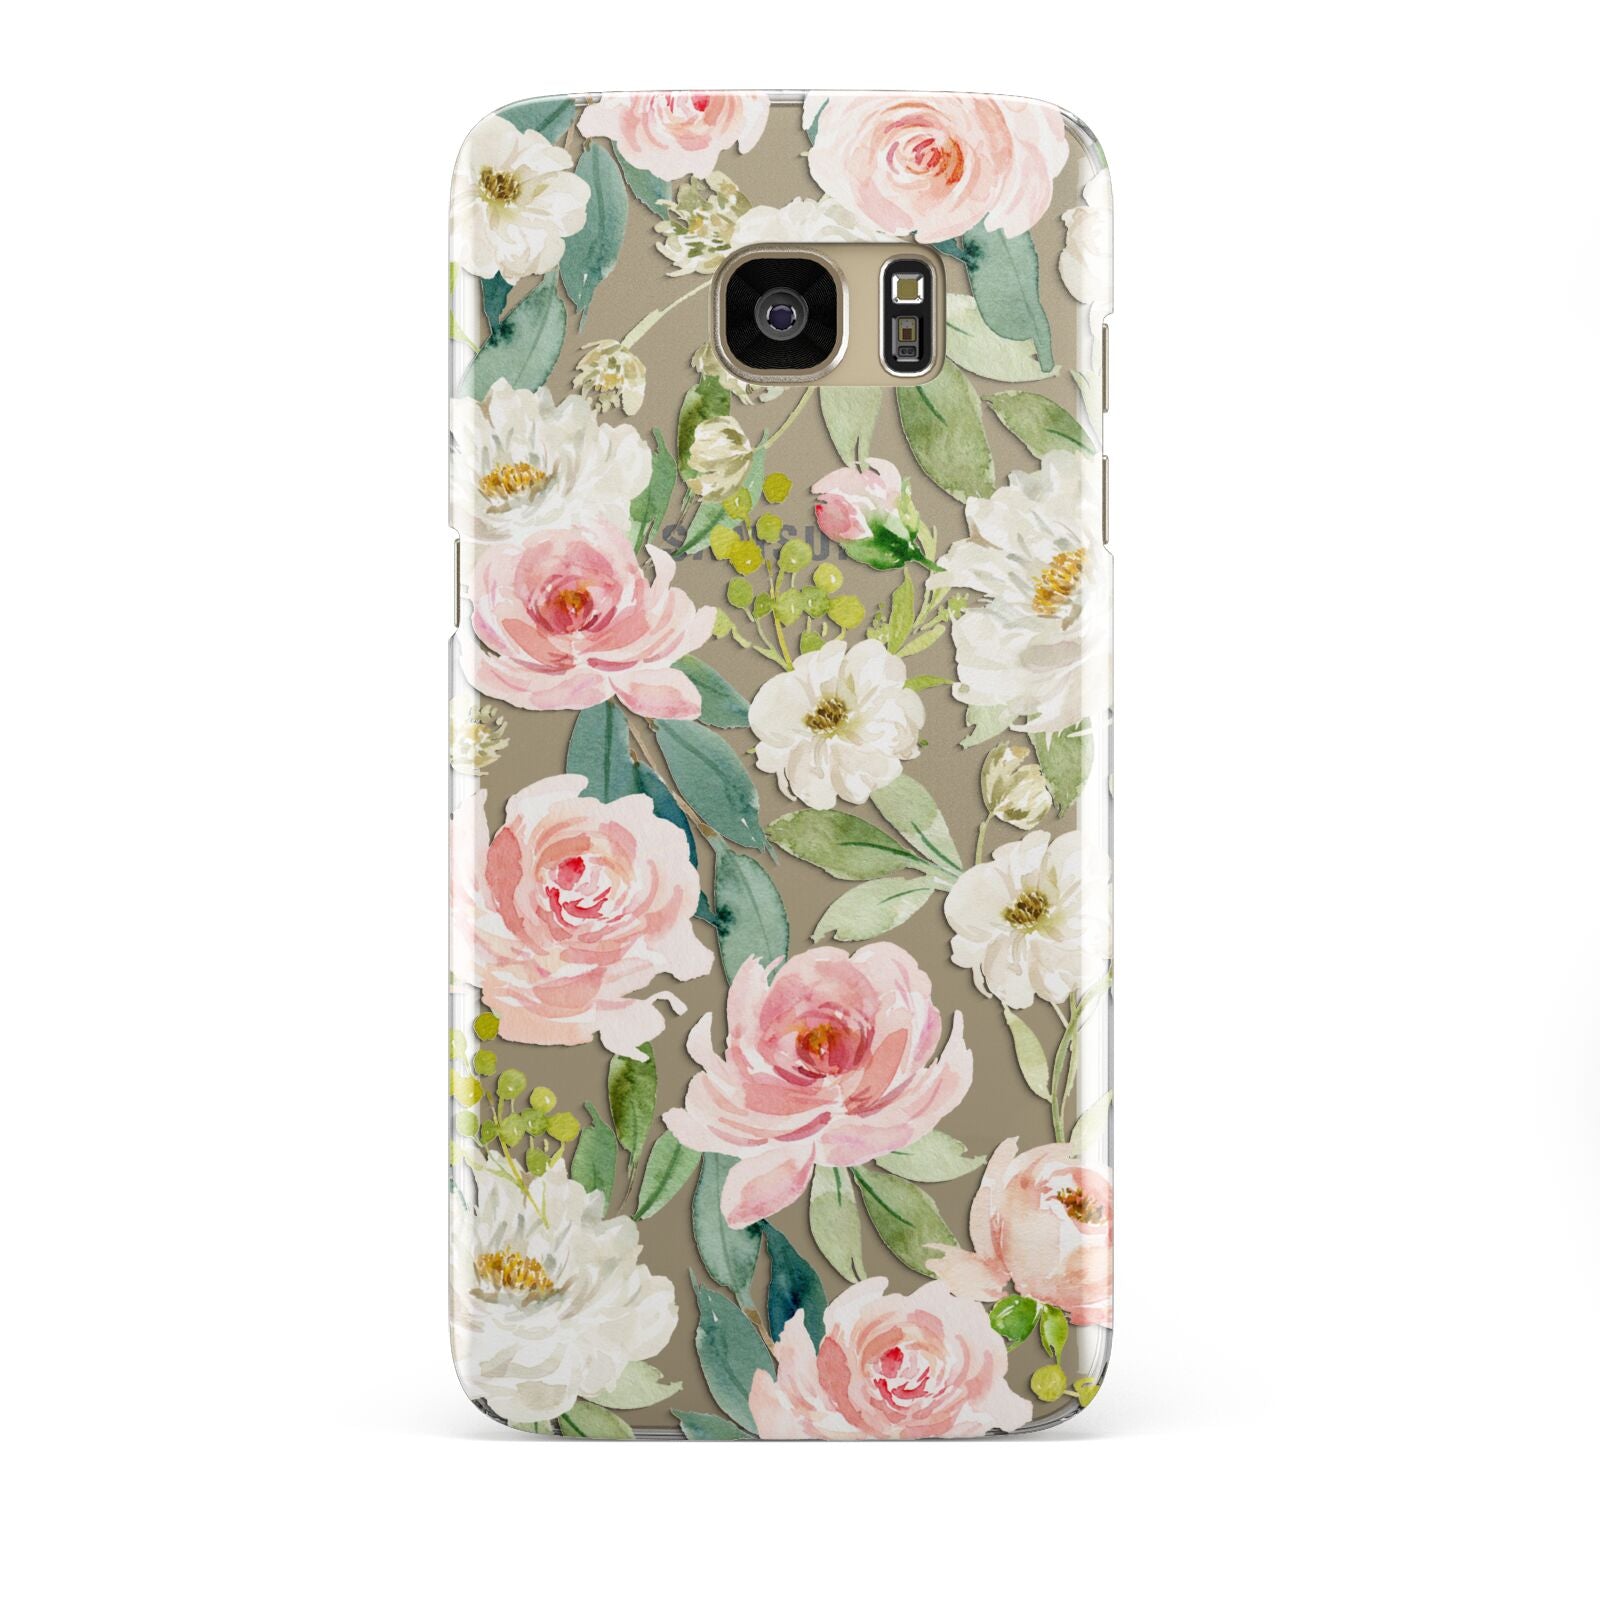 Watercolour Peonies Roses and Foliage Samsung Galaxy S7 Edge Case